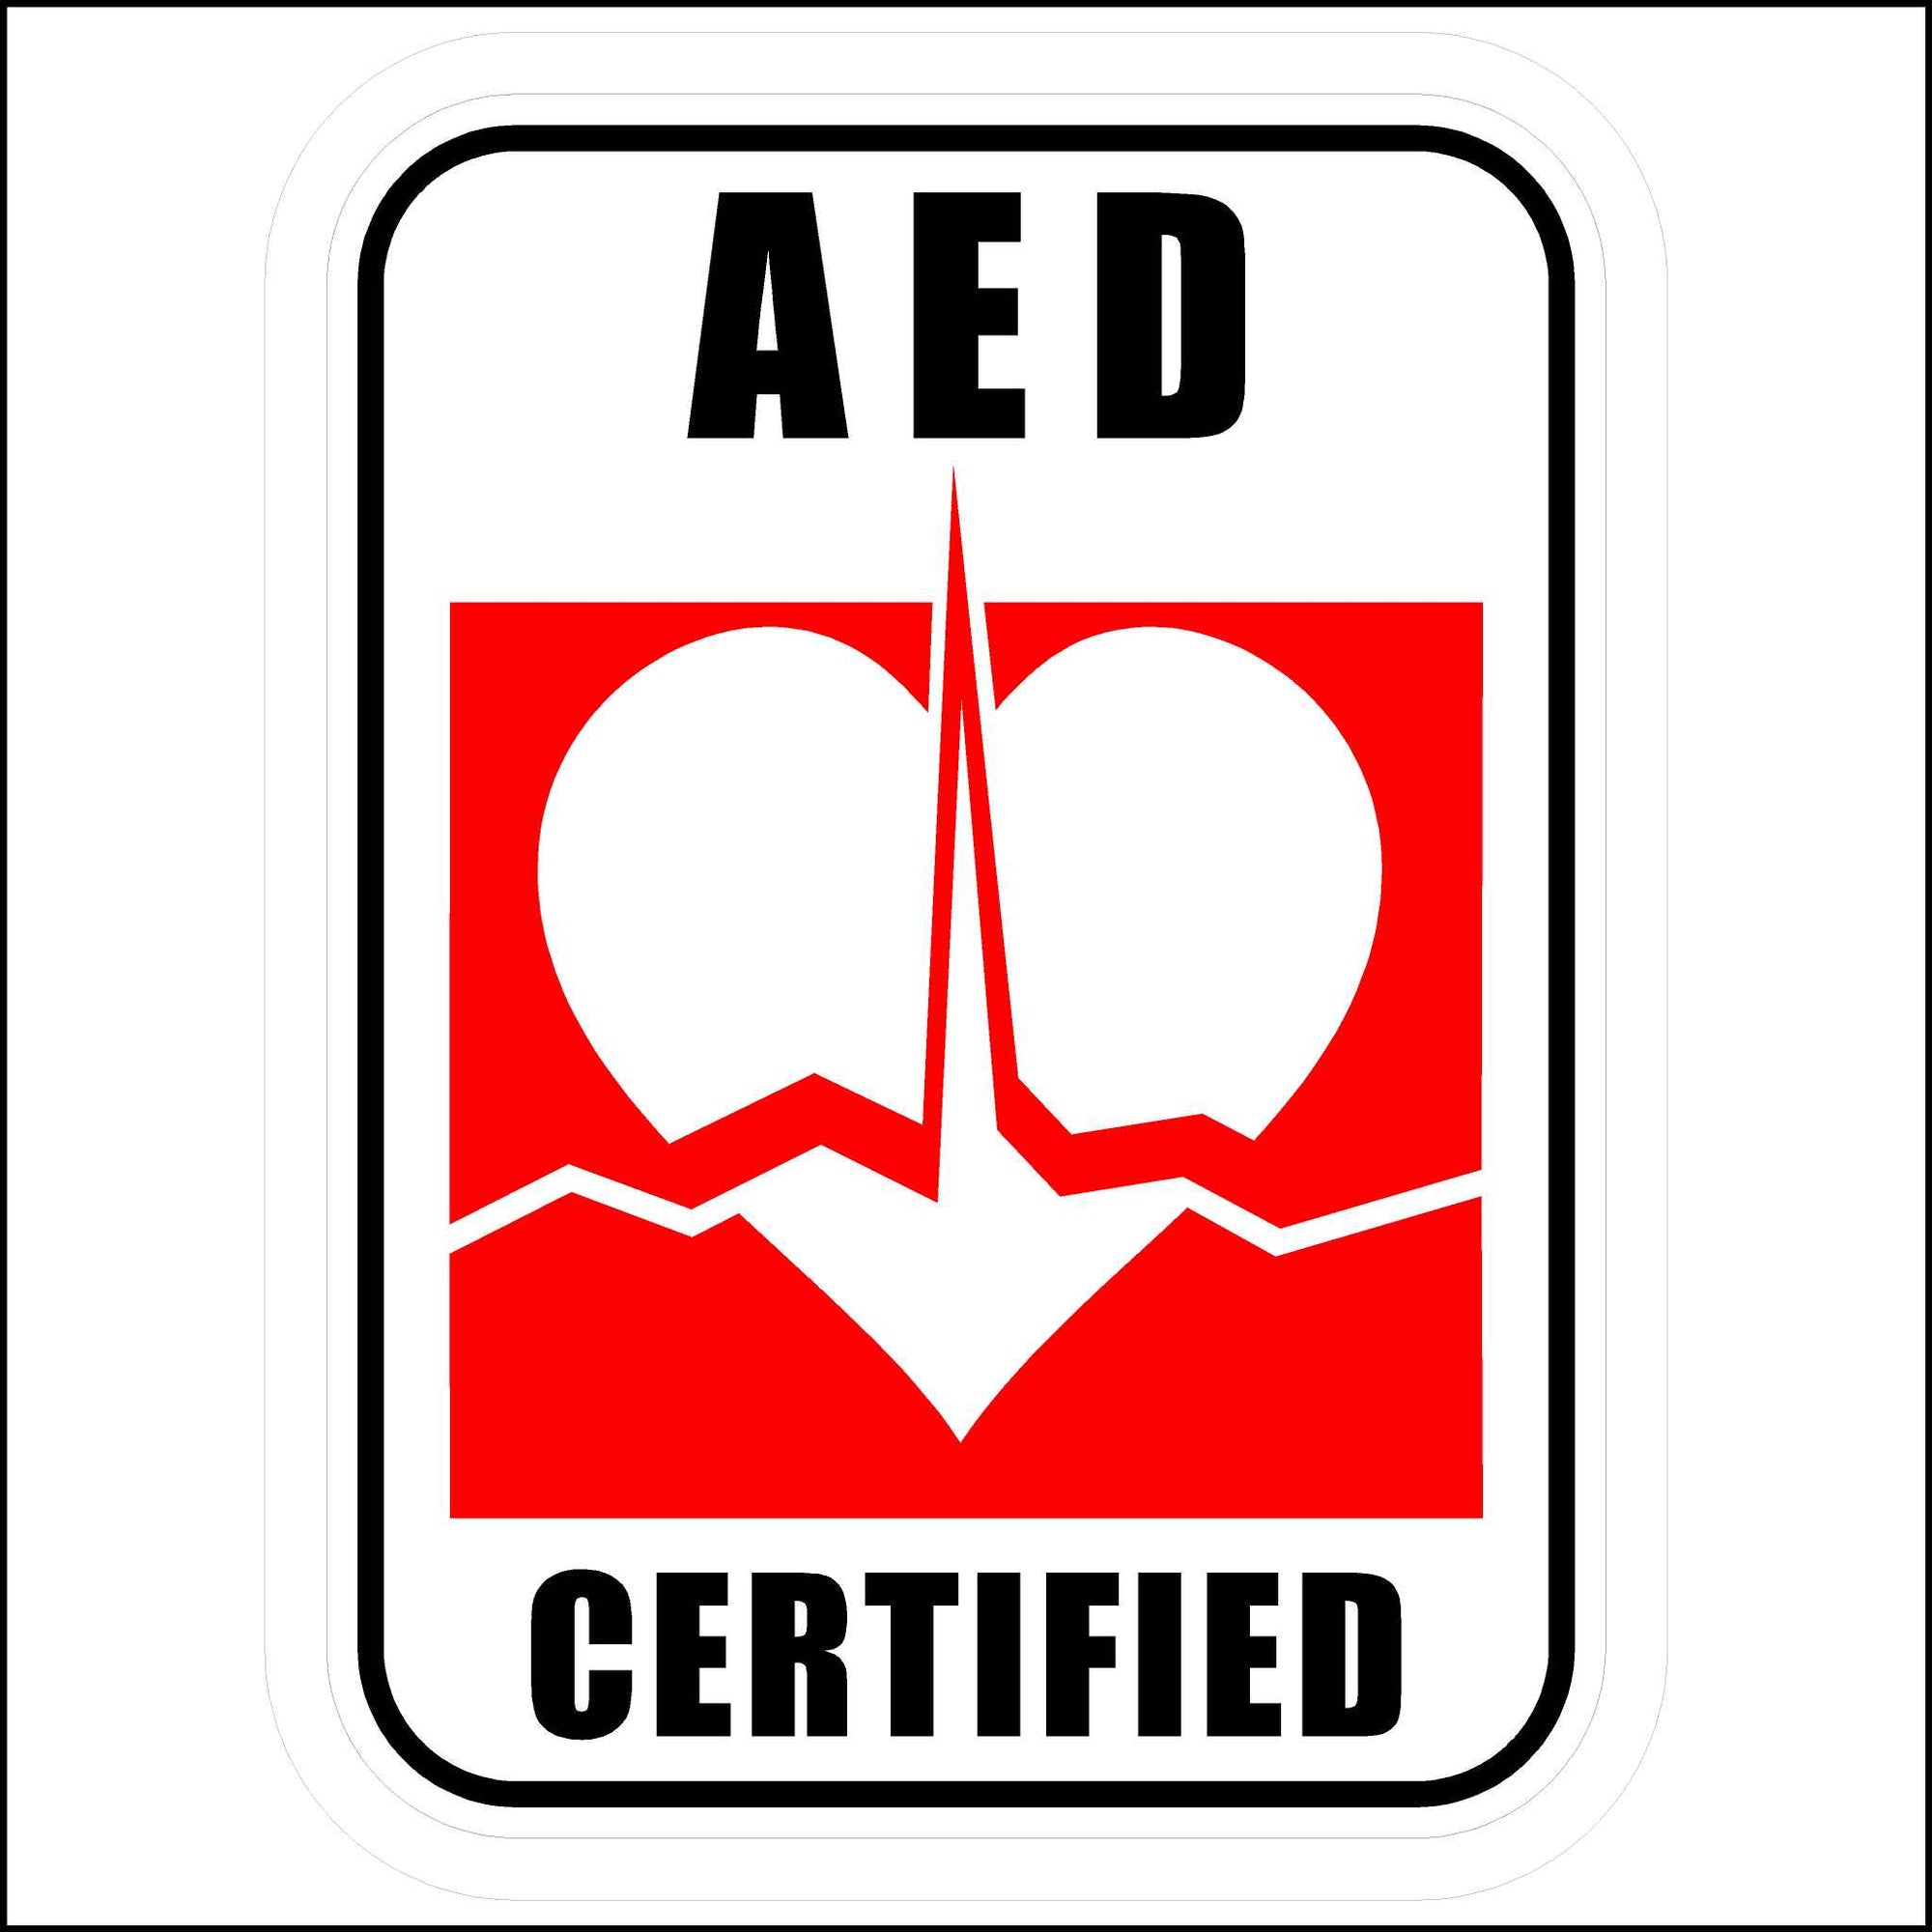 AED Certified Sticker printed in red, white, and black.